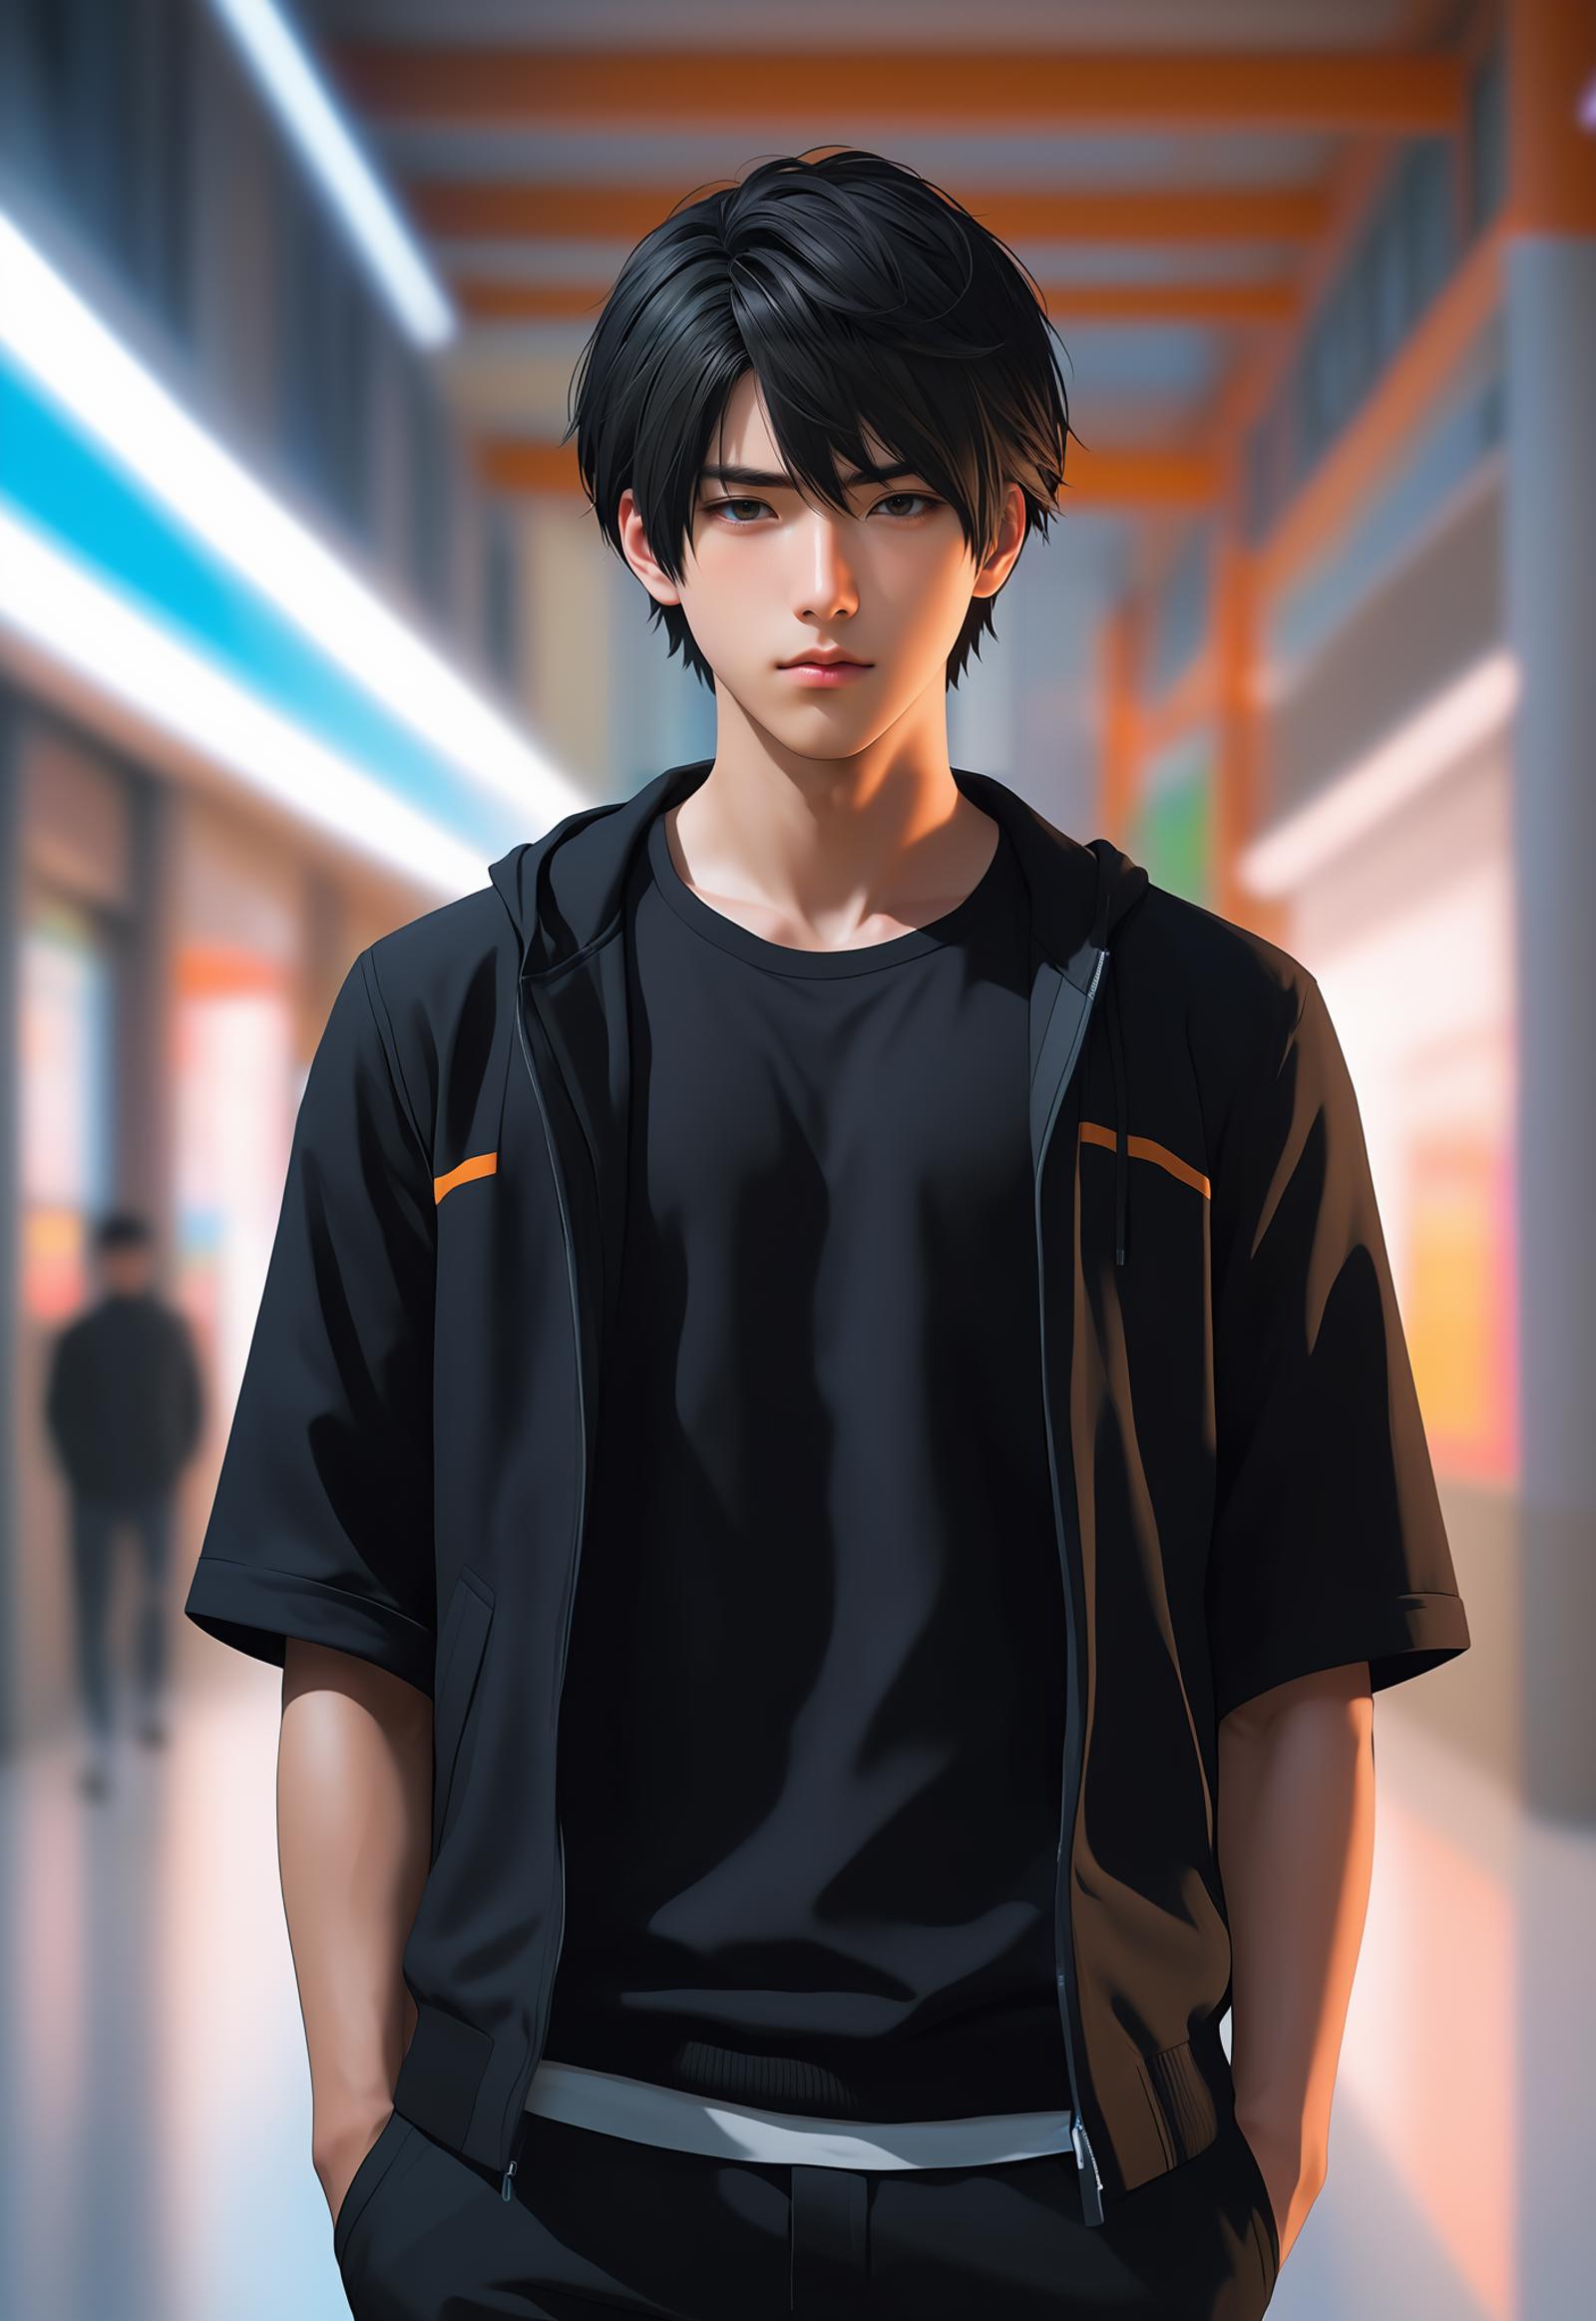 Anime style illustration of a young man wearing a black shirt and a black jacket.